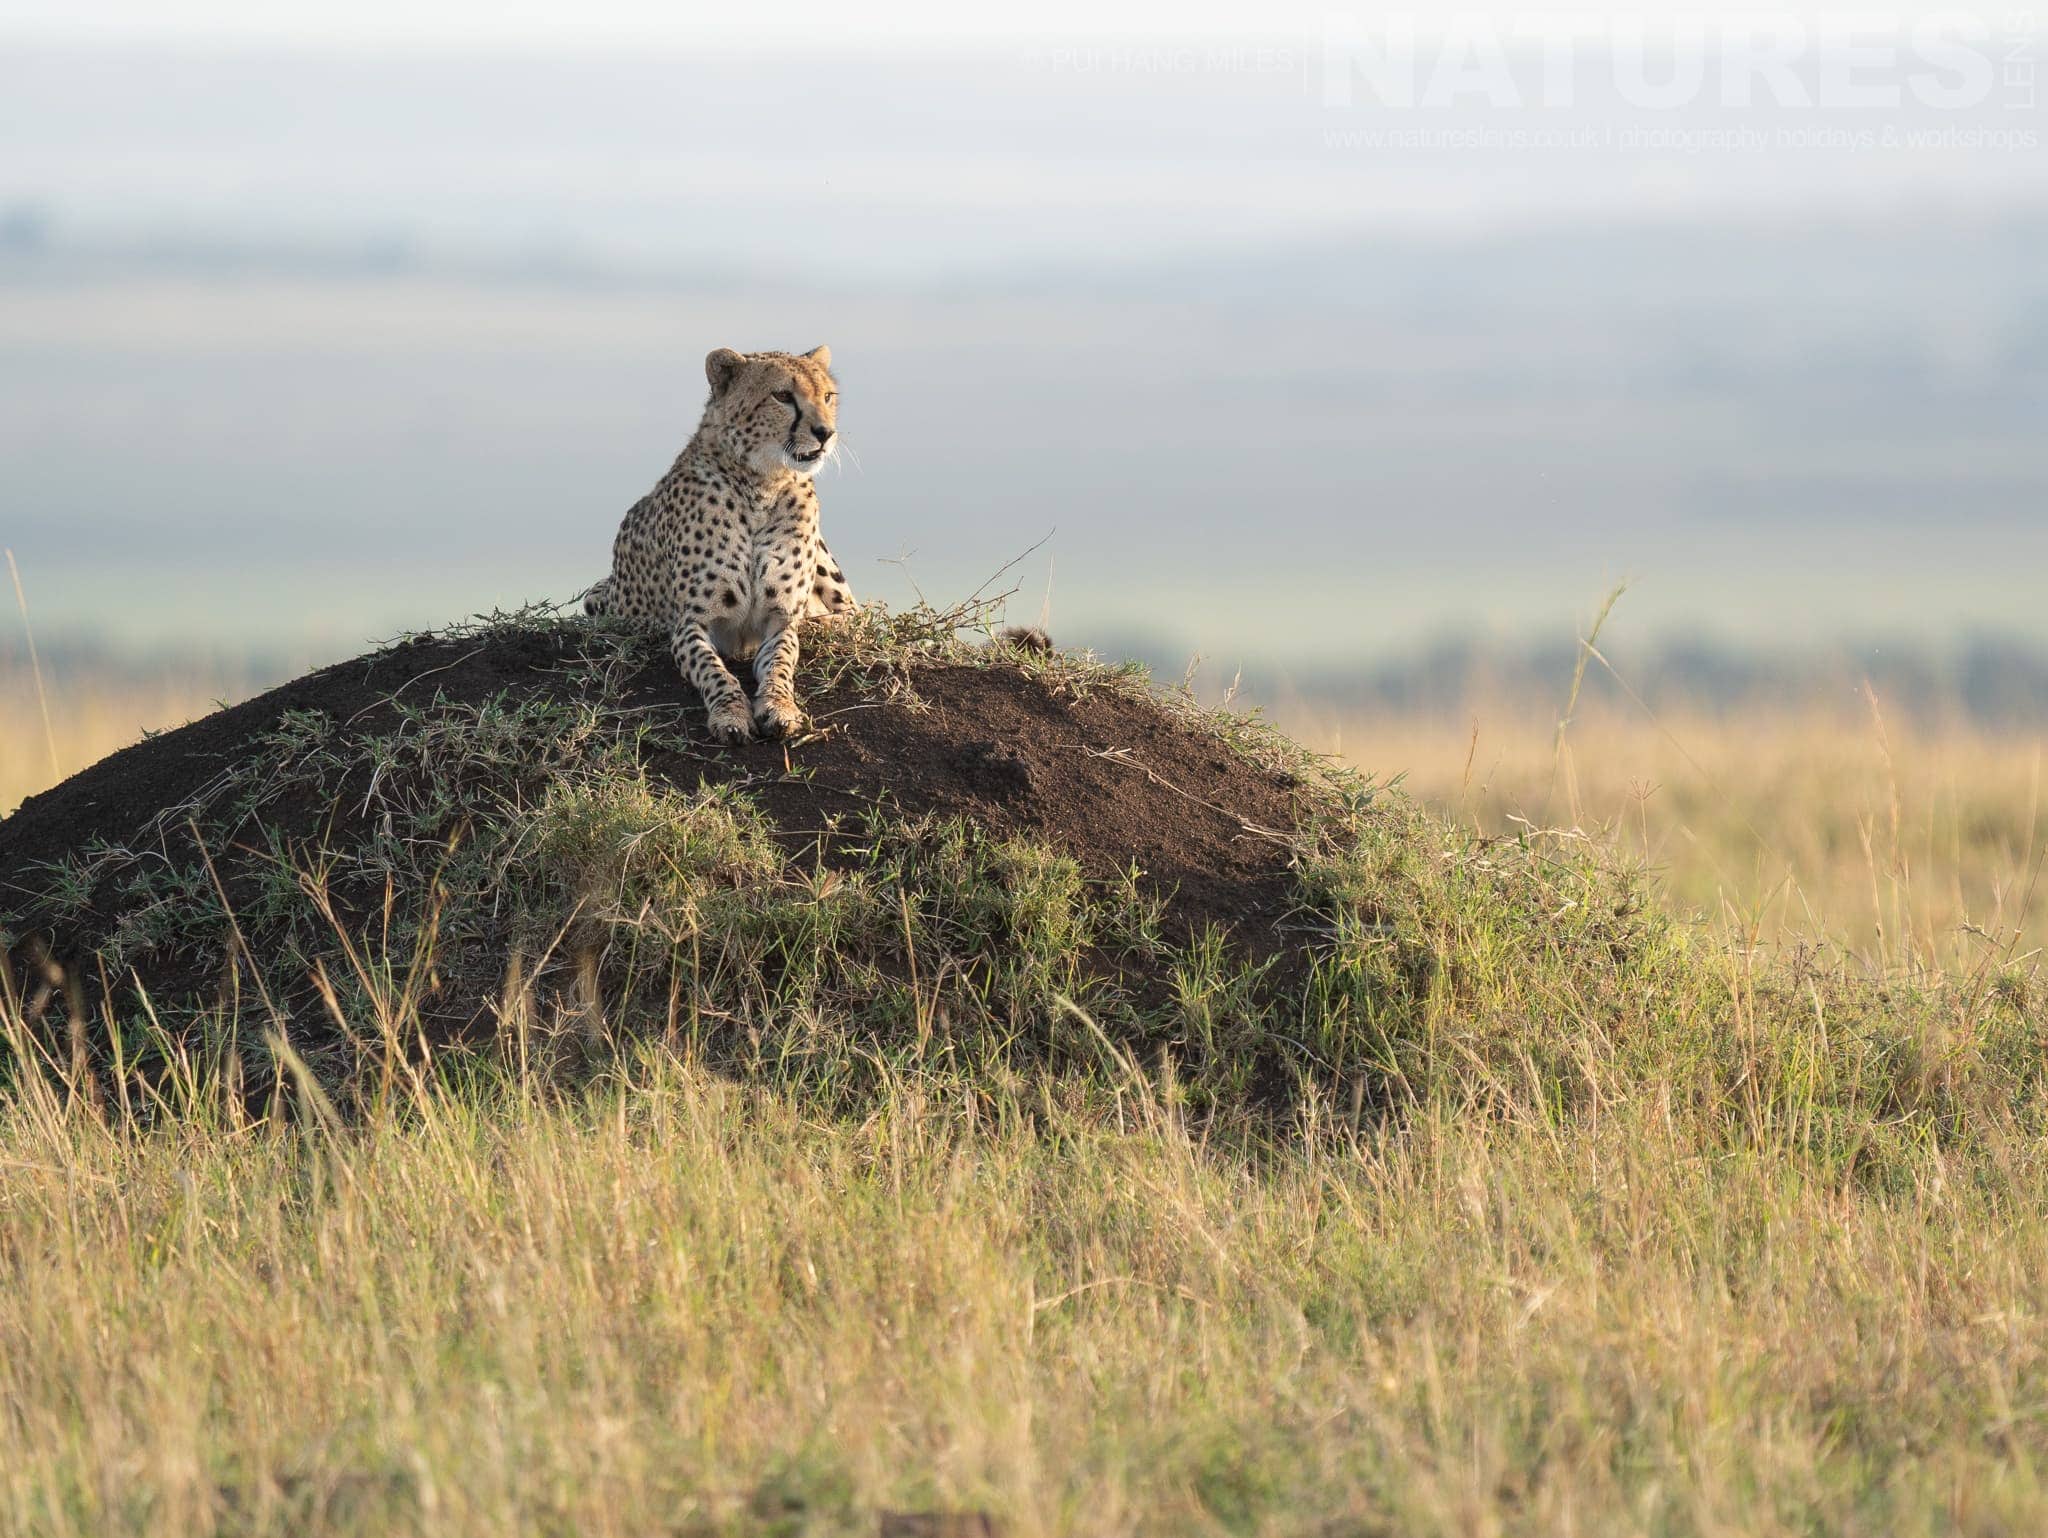 One Of The Mara Cheetahs On A Raised Vantage Point Photographed During A Natureslens Photography Holiday To Photograph The Wildlife Of The Maasai Mara